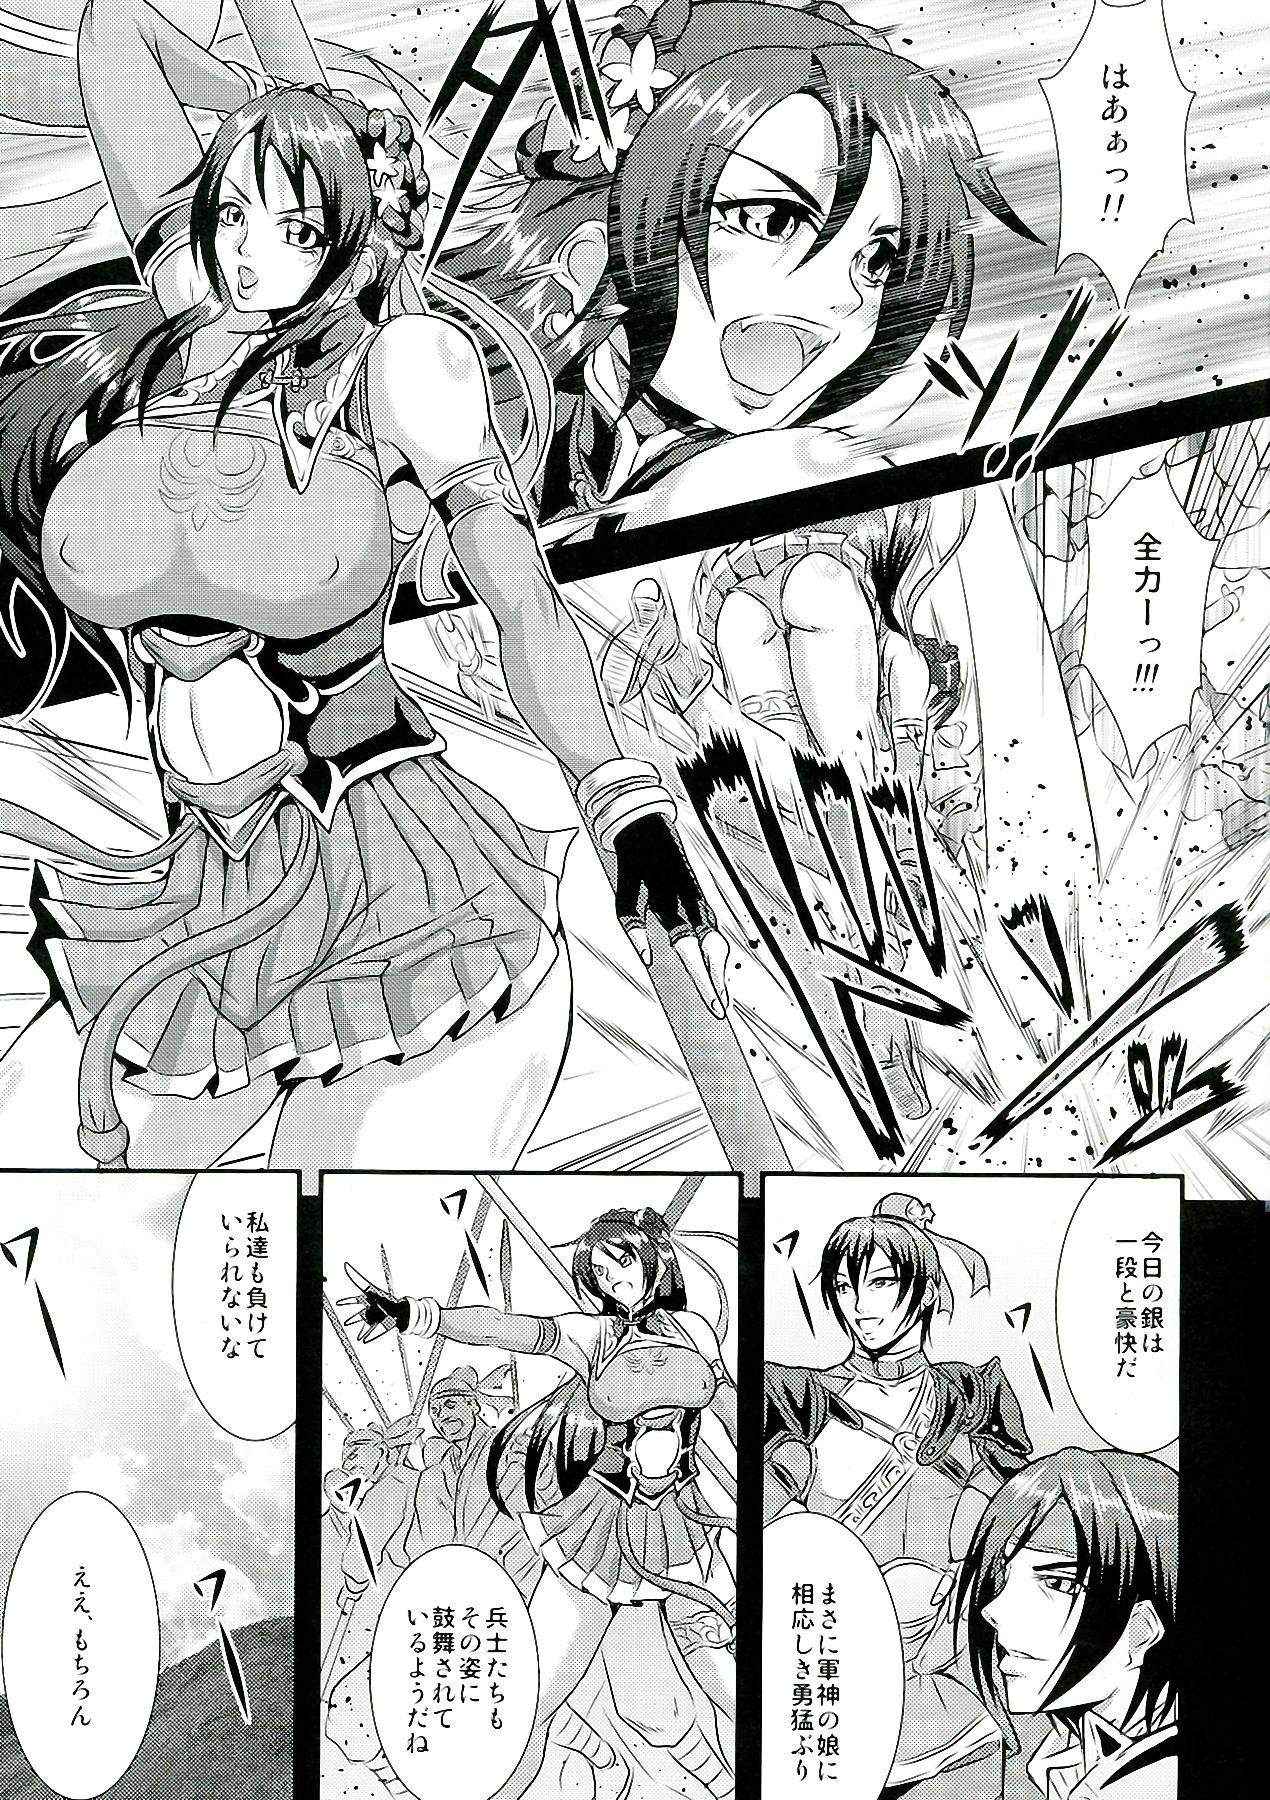 Whore Gisho . Seki Gin Byouden - Dynasty warriors Pigtails - Page 3